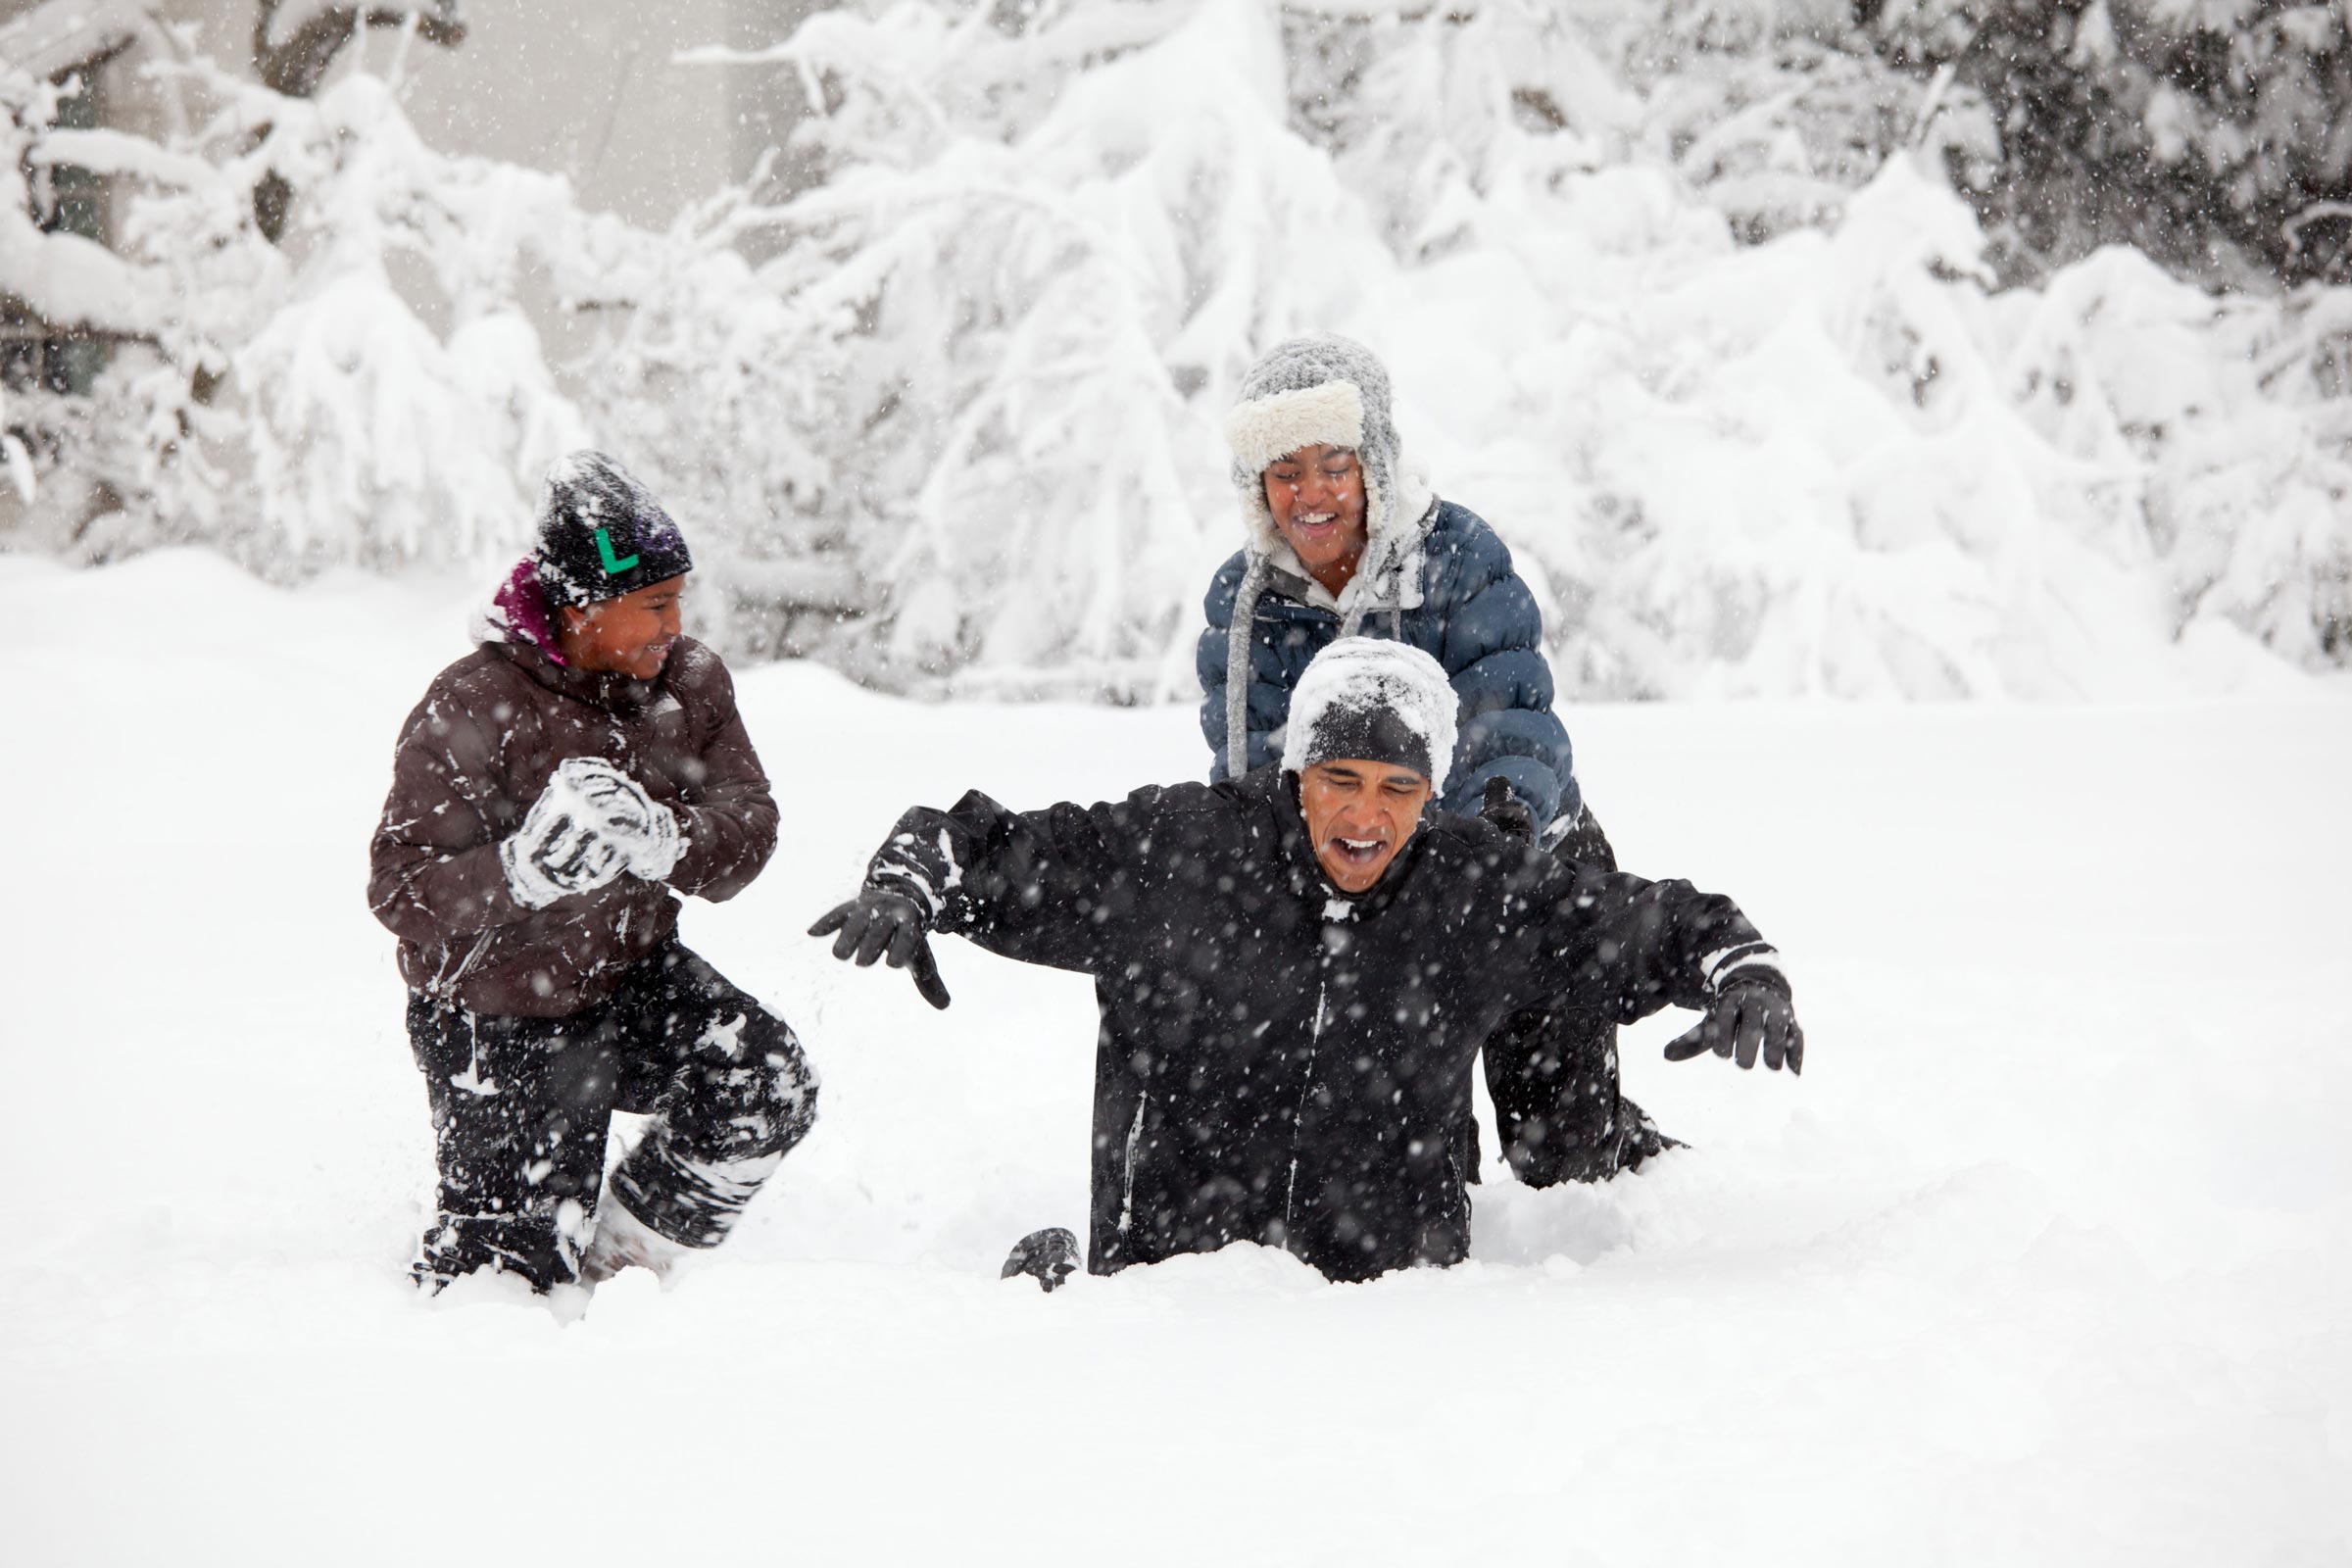 Obama playing in the snow with two other people